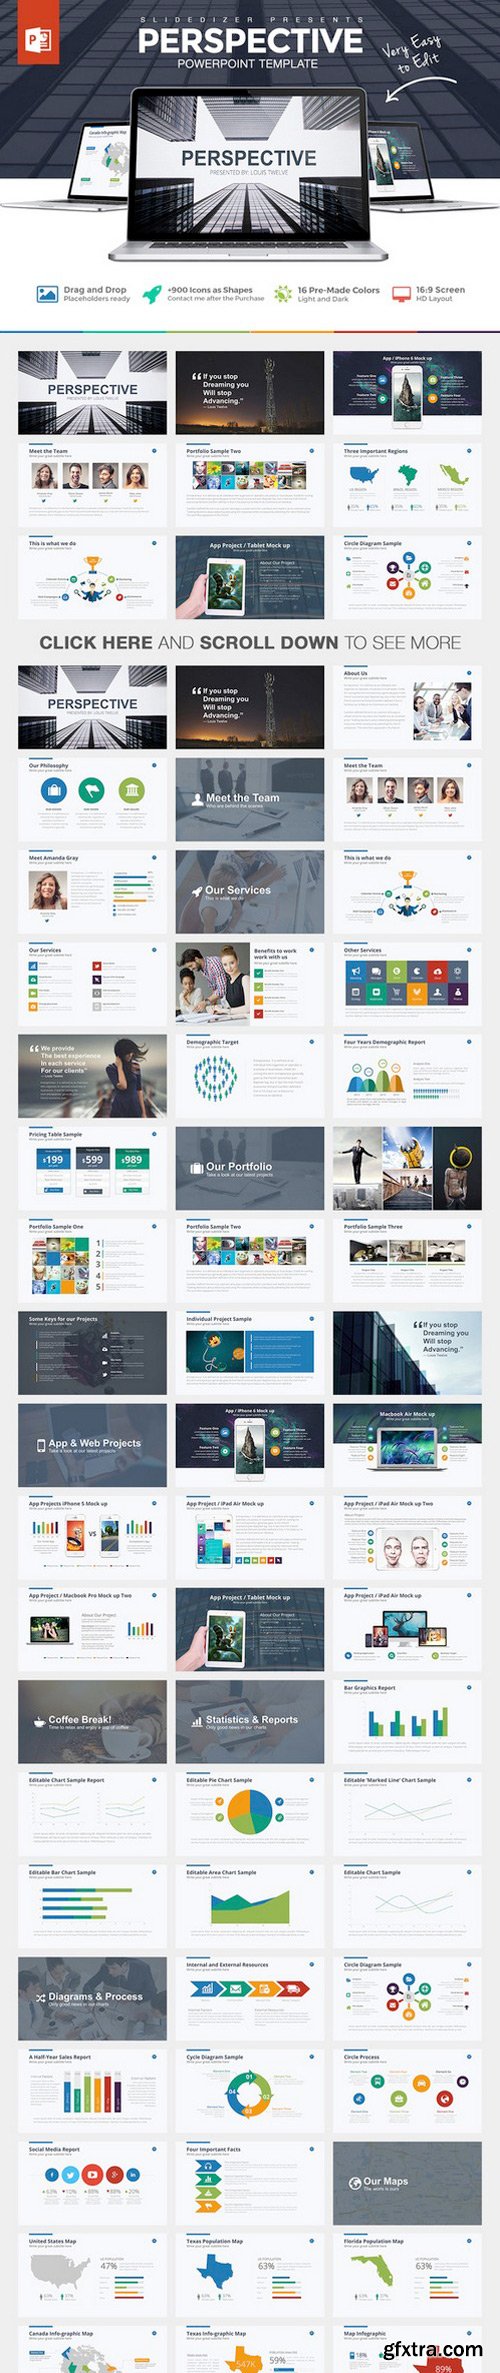 CM - Perspective Powerpoint Template 514973